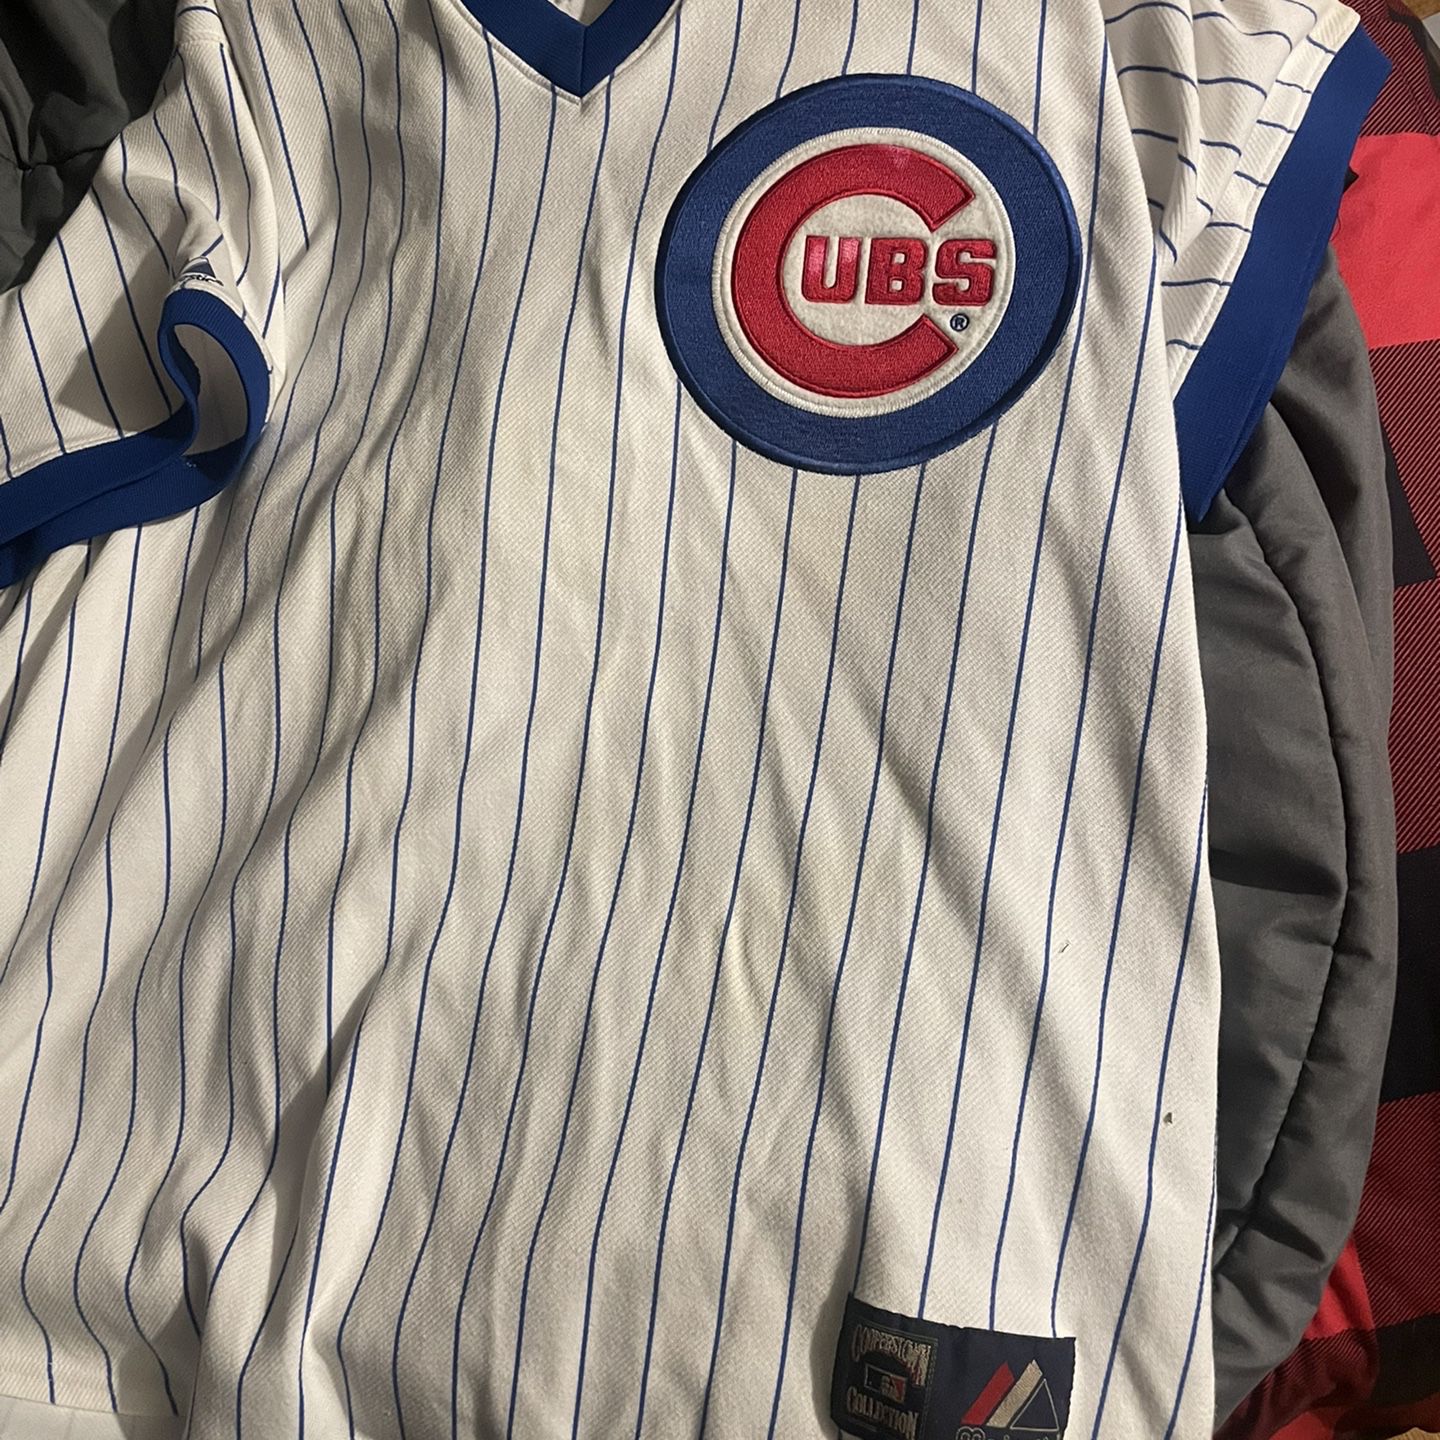 Cubs jersey signed by Alfonso Soriano there's proof in one of the pics for  Sale in Burbank, IL - OfferUp